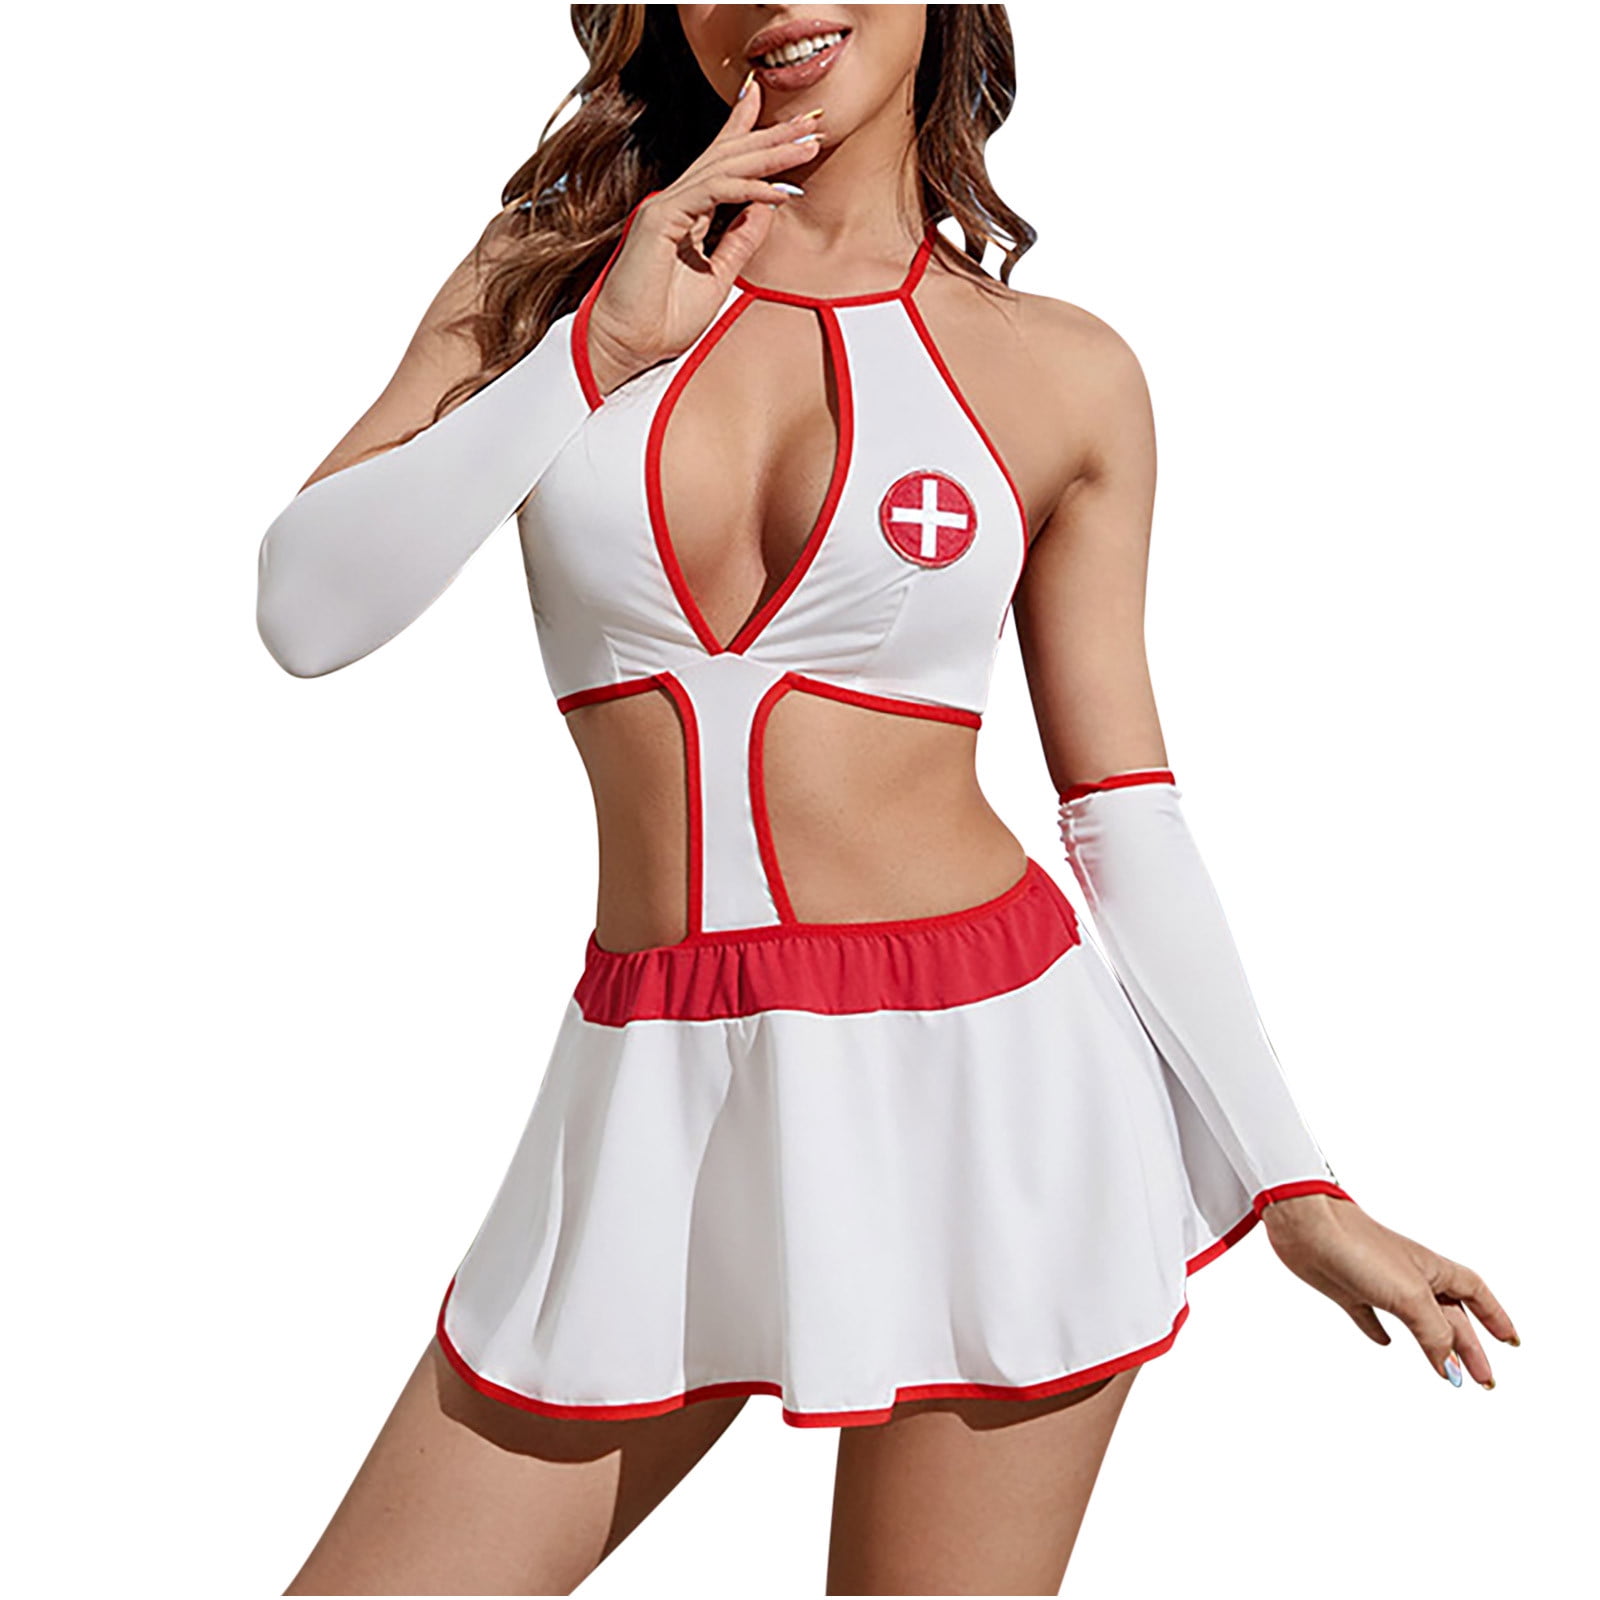  plus Size Lingerie 4x Women Sexy Cosplay Costume Cute